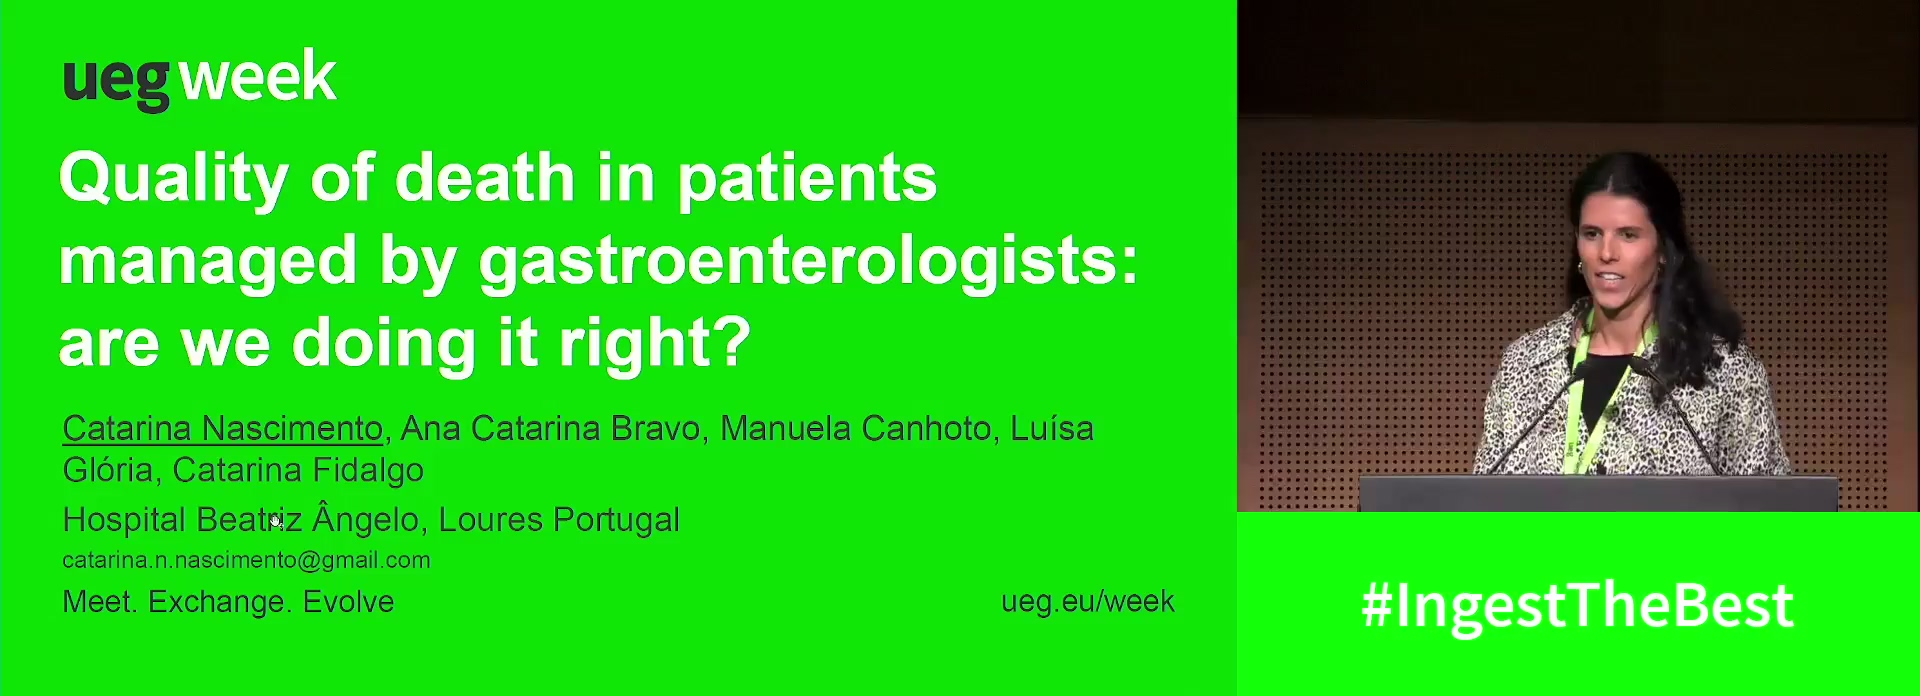 QUALITY OF DEATH IN CANCER PATIENTS MANAGED BY GASTROENTEROLOGISTS: ARE WE DOING IT RIGHT?